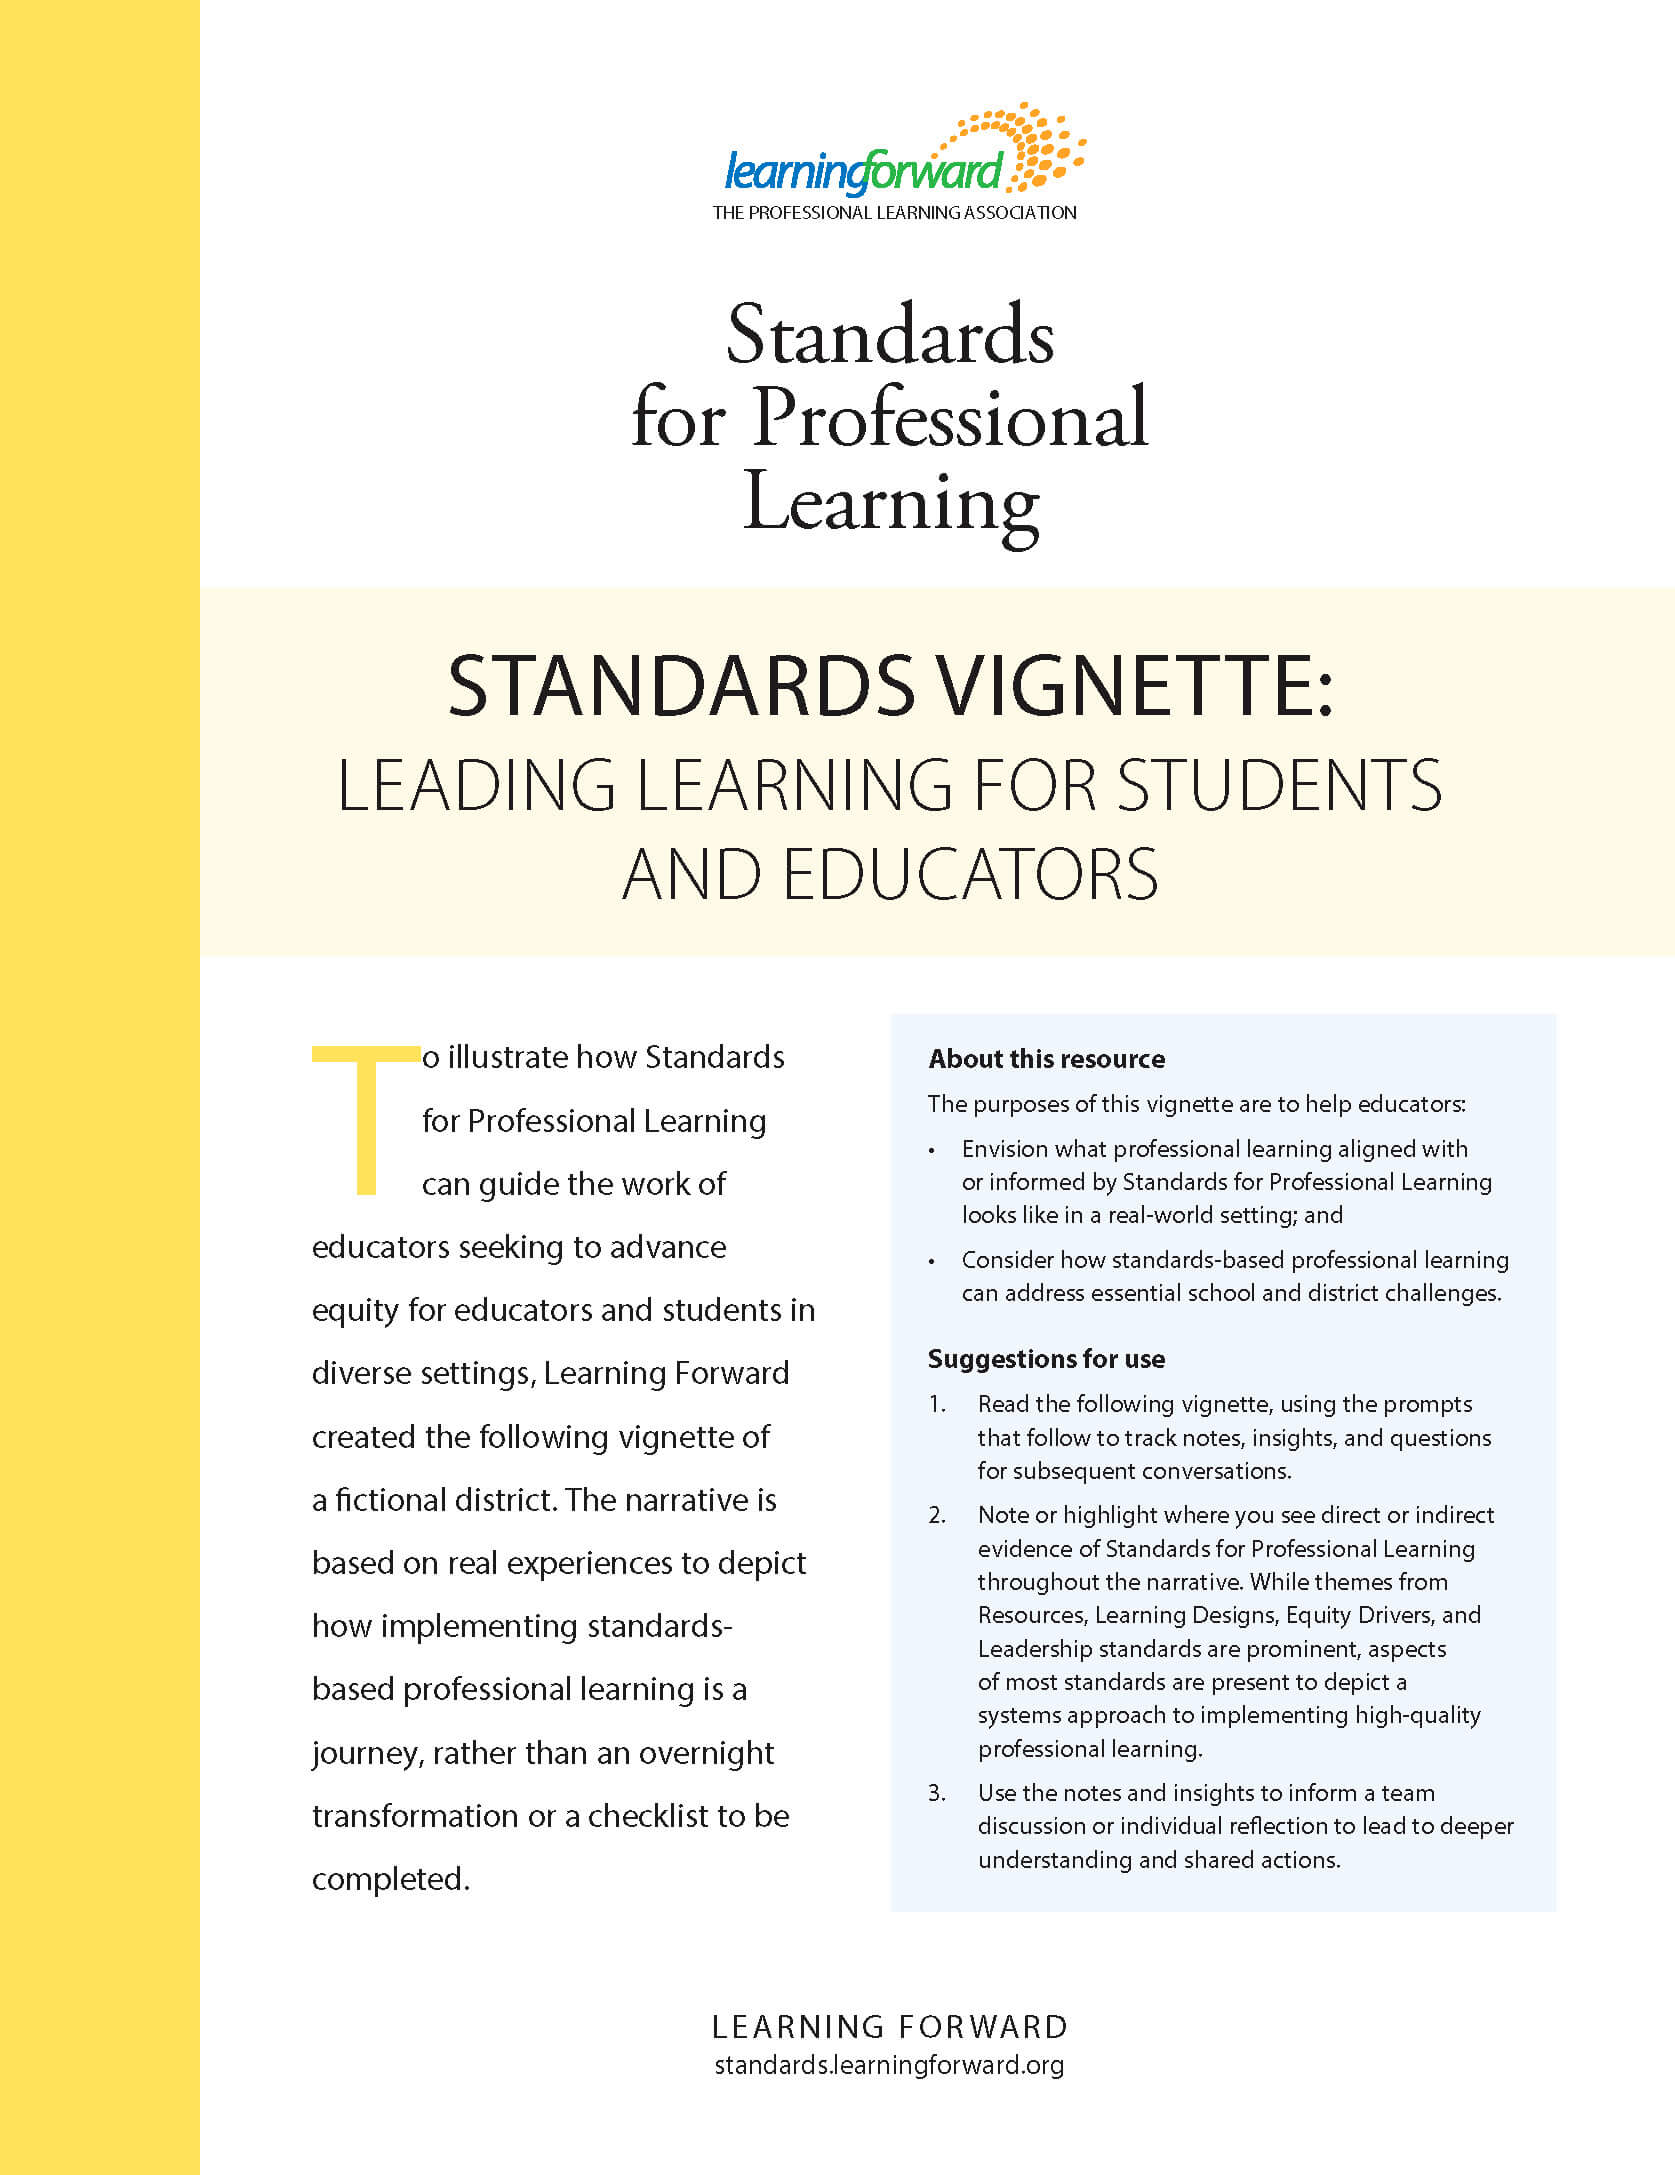 cover image from STANDARDS VIGNETTE: LEADING LEARNING FOR STUDENTS AND EDUCATORS